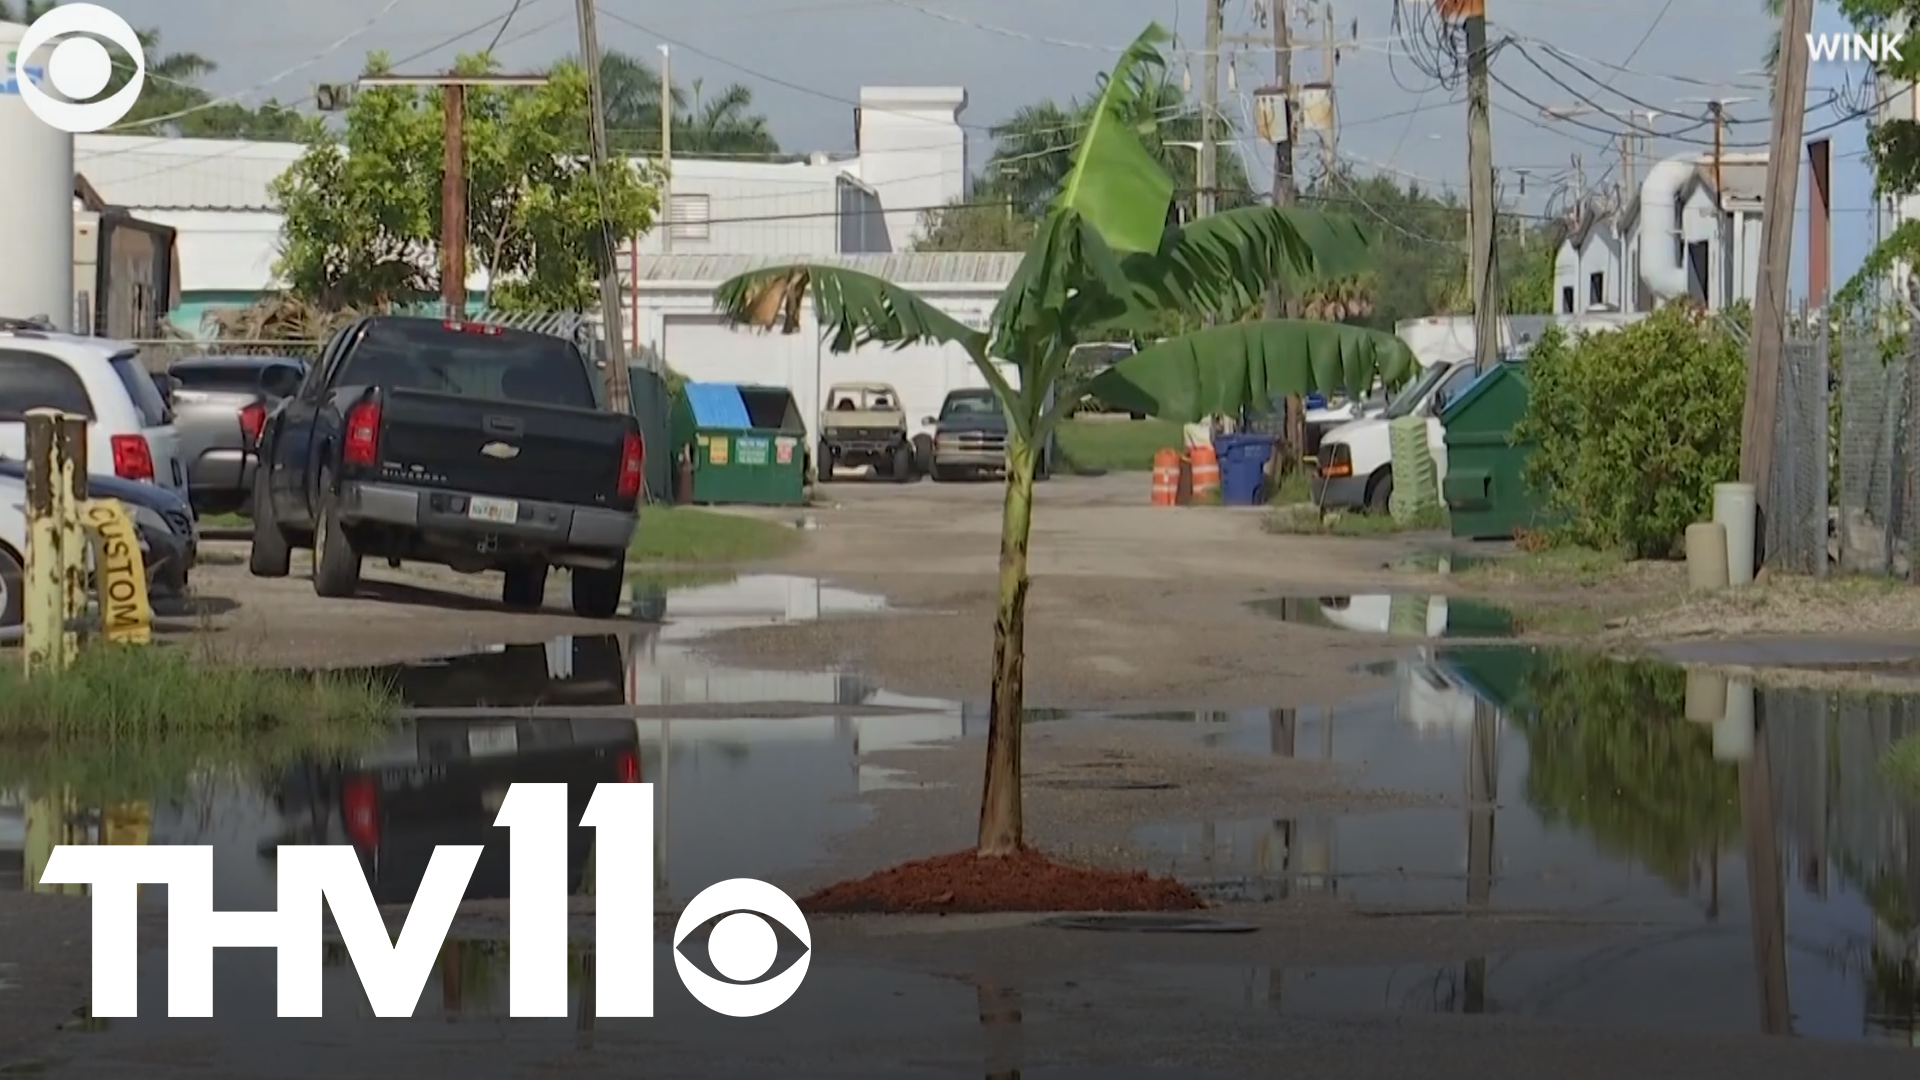 A banana tree popped up in a strange place recently - inside a pothole in Fort Myers, FL. People in the area say it was planted to make a point about all the pothole